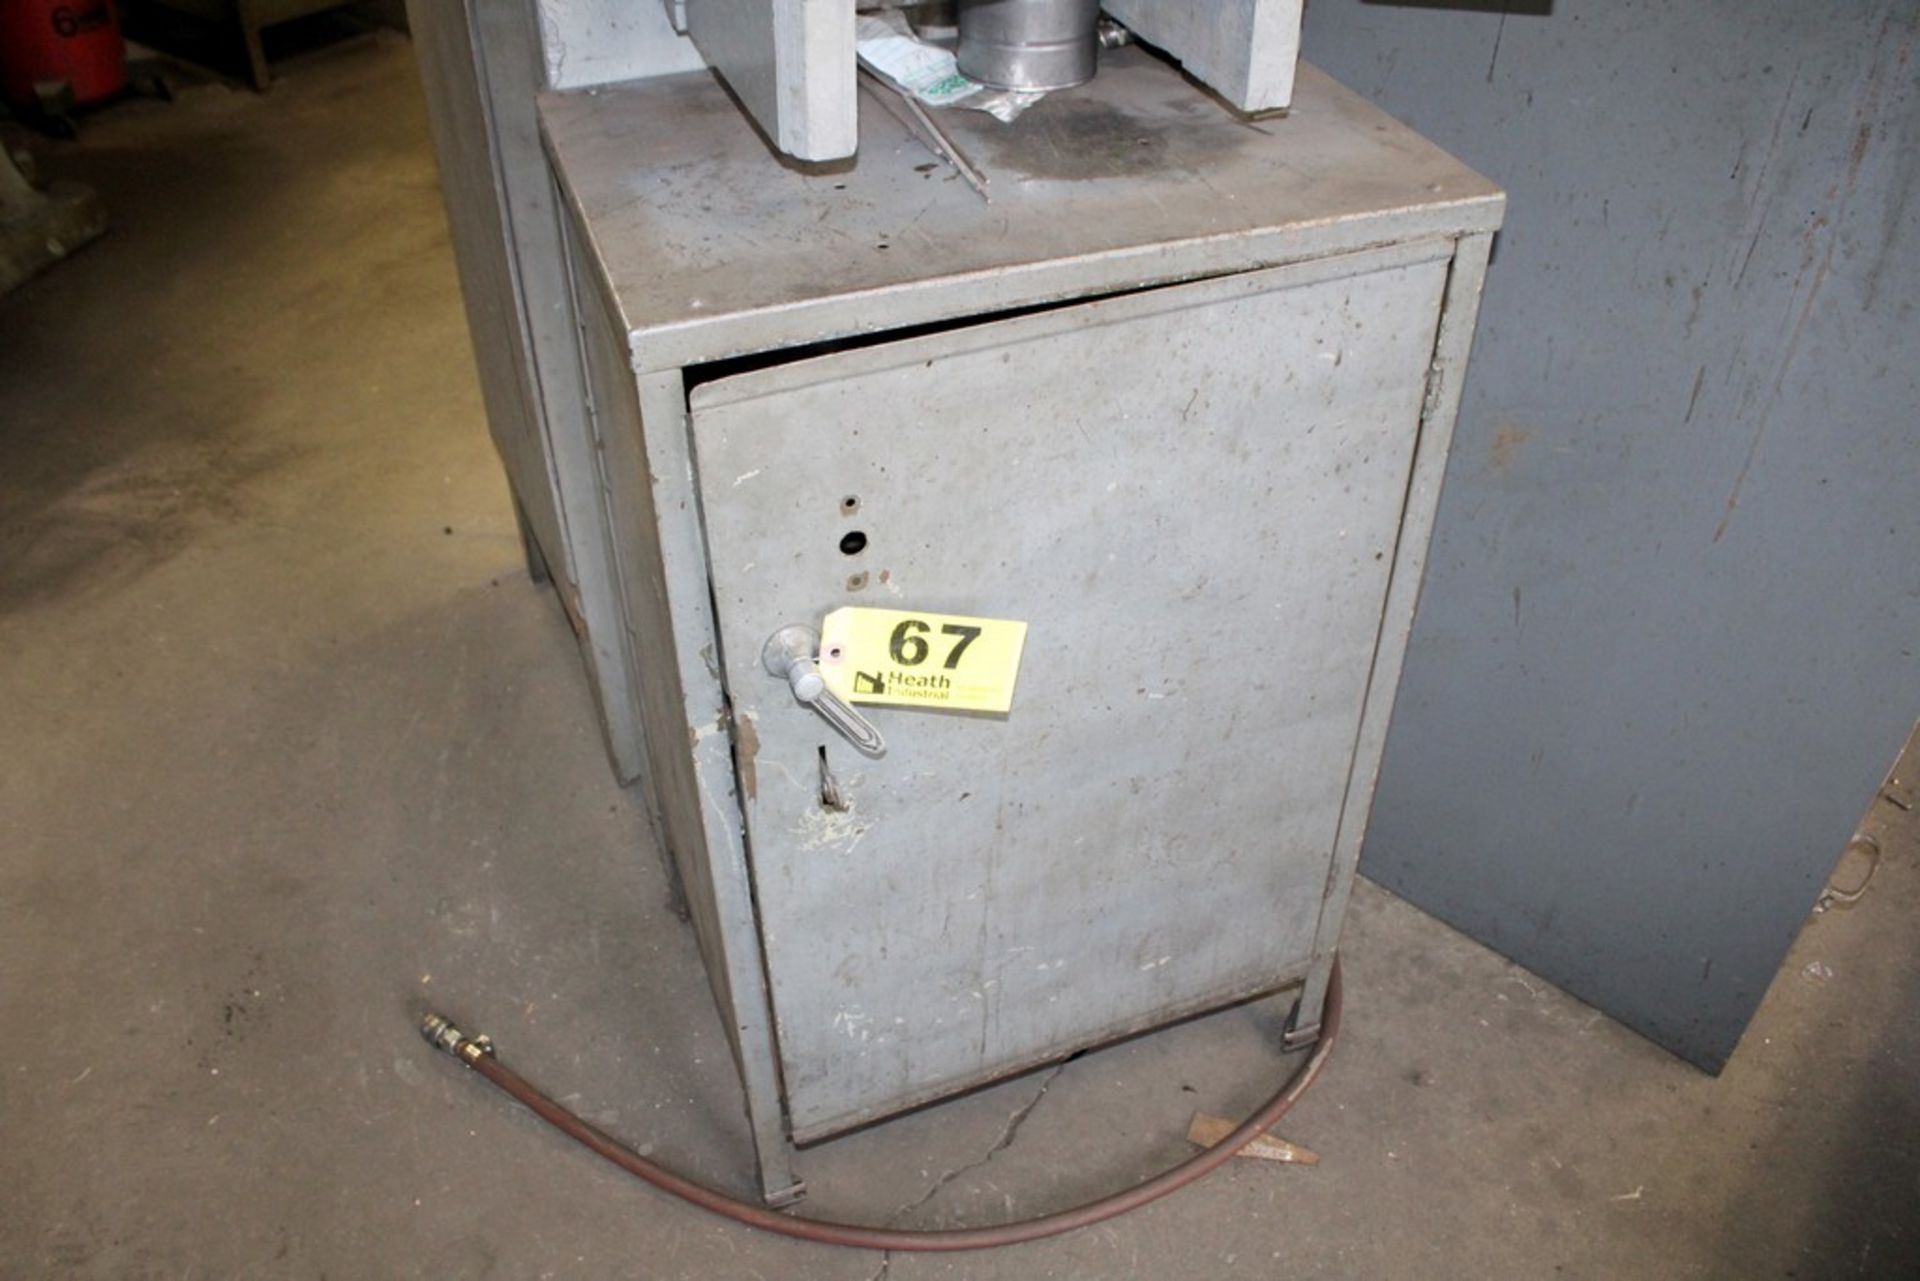 Steel Storage Cabinet and Contents - 21" x 15" x 34" H